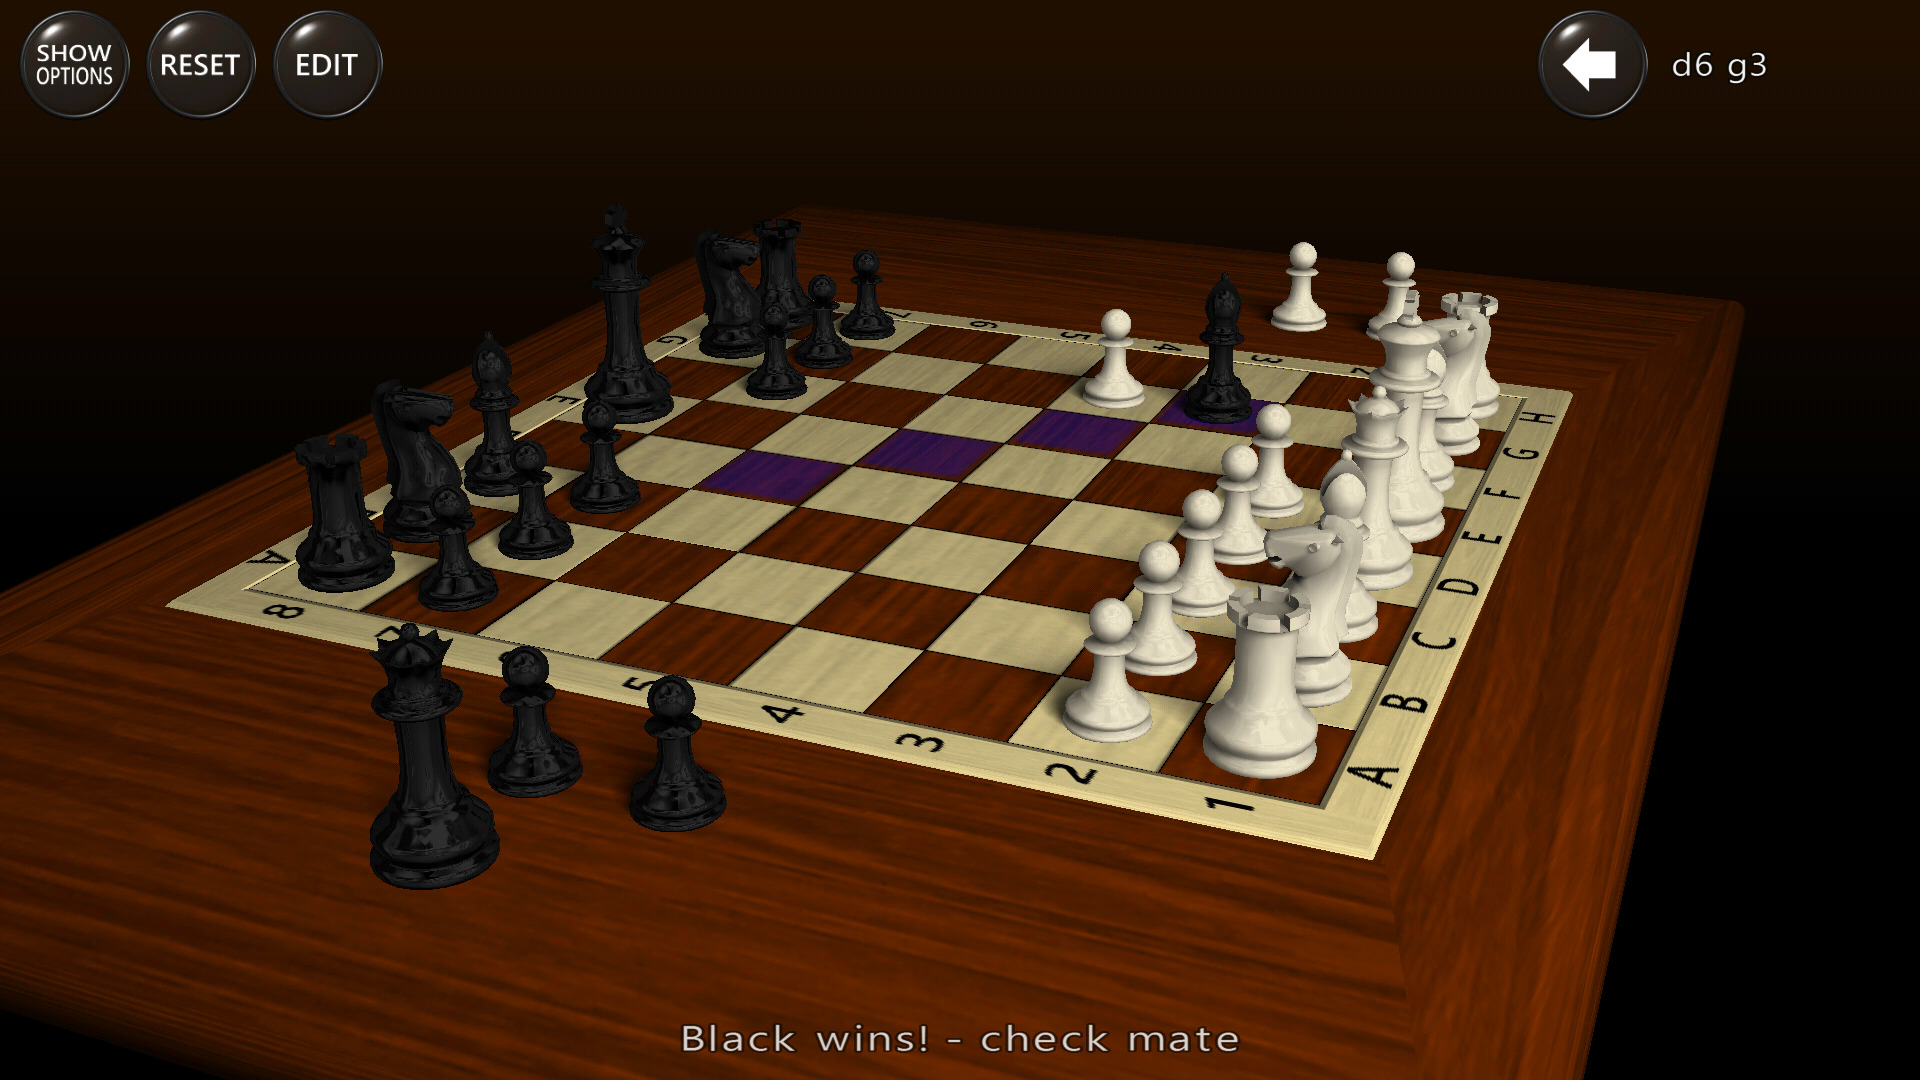 ION M.G Chess download the last version for ios